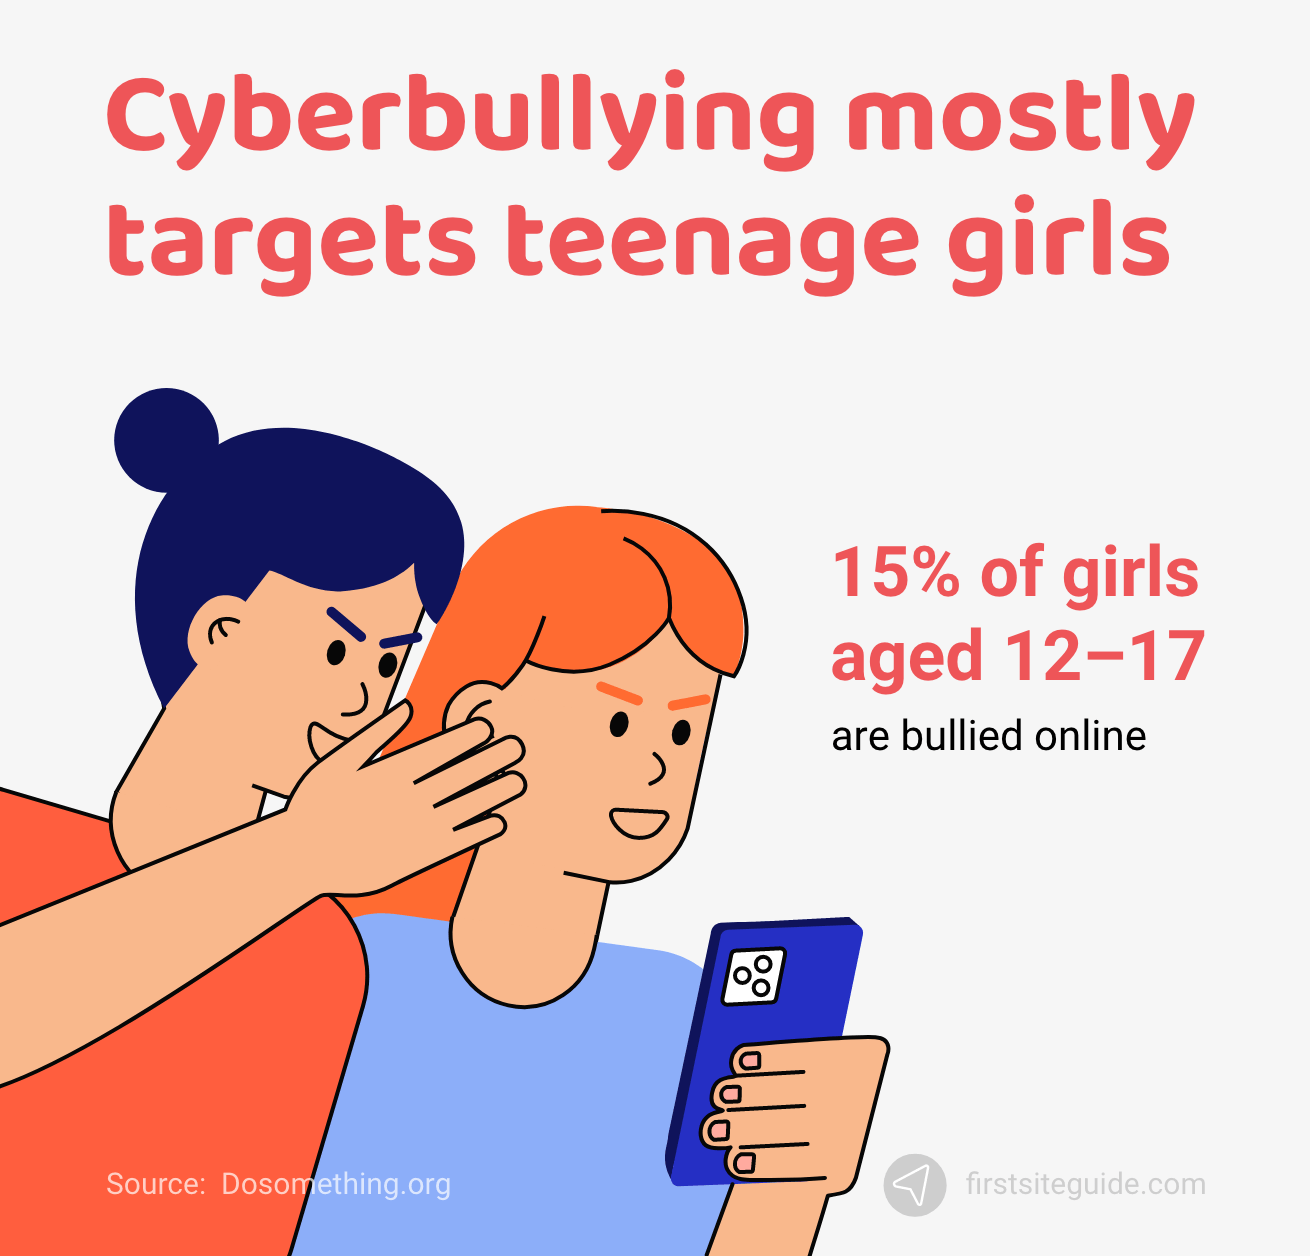 Teenage girls are mostly targeted by cyberbullying